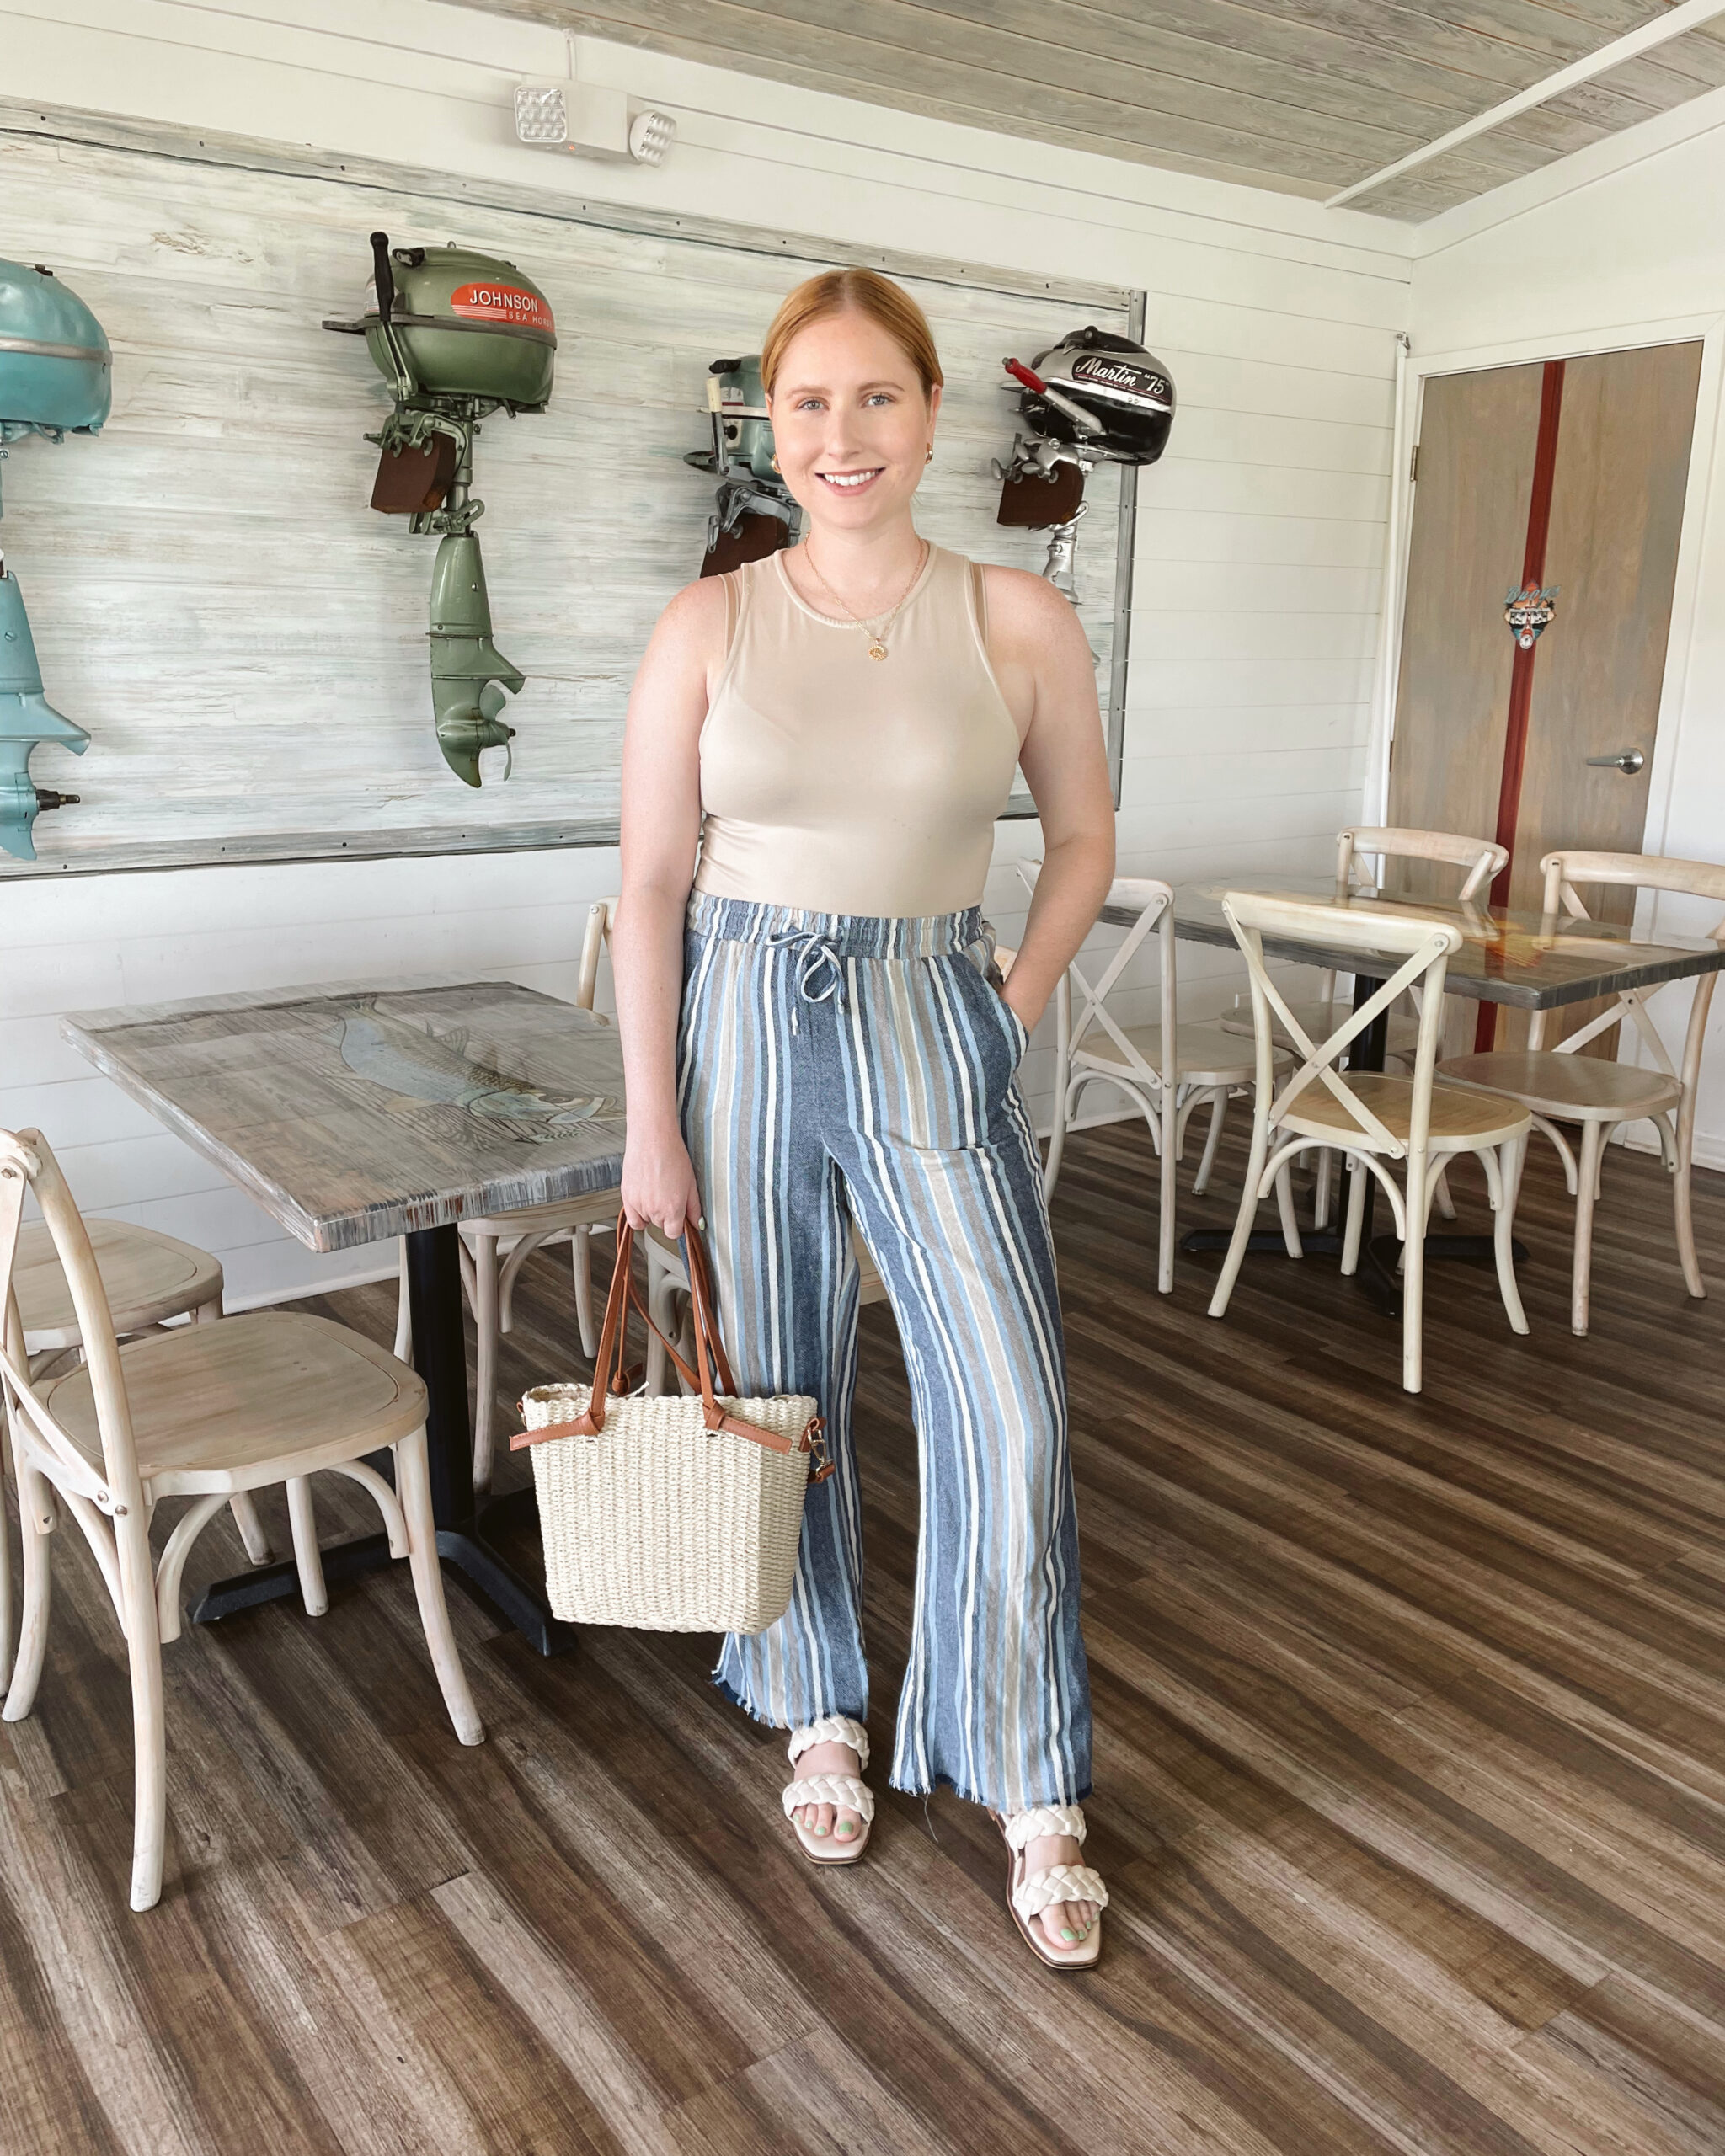 Tan bodysuit, blue and tan striped linen pants, white braided sandals, rattan tote bag - Summer Outfit 2022